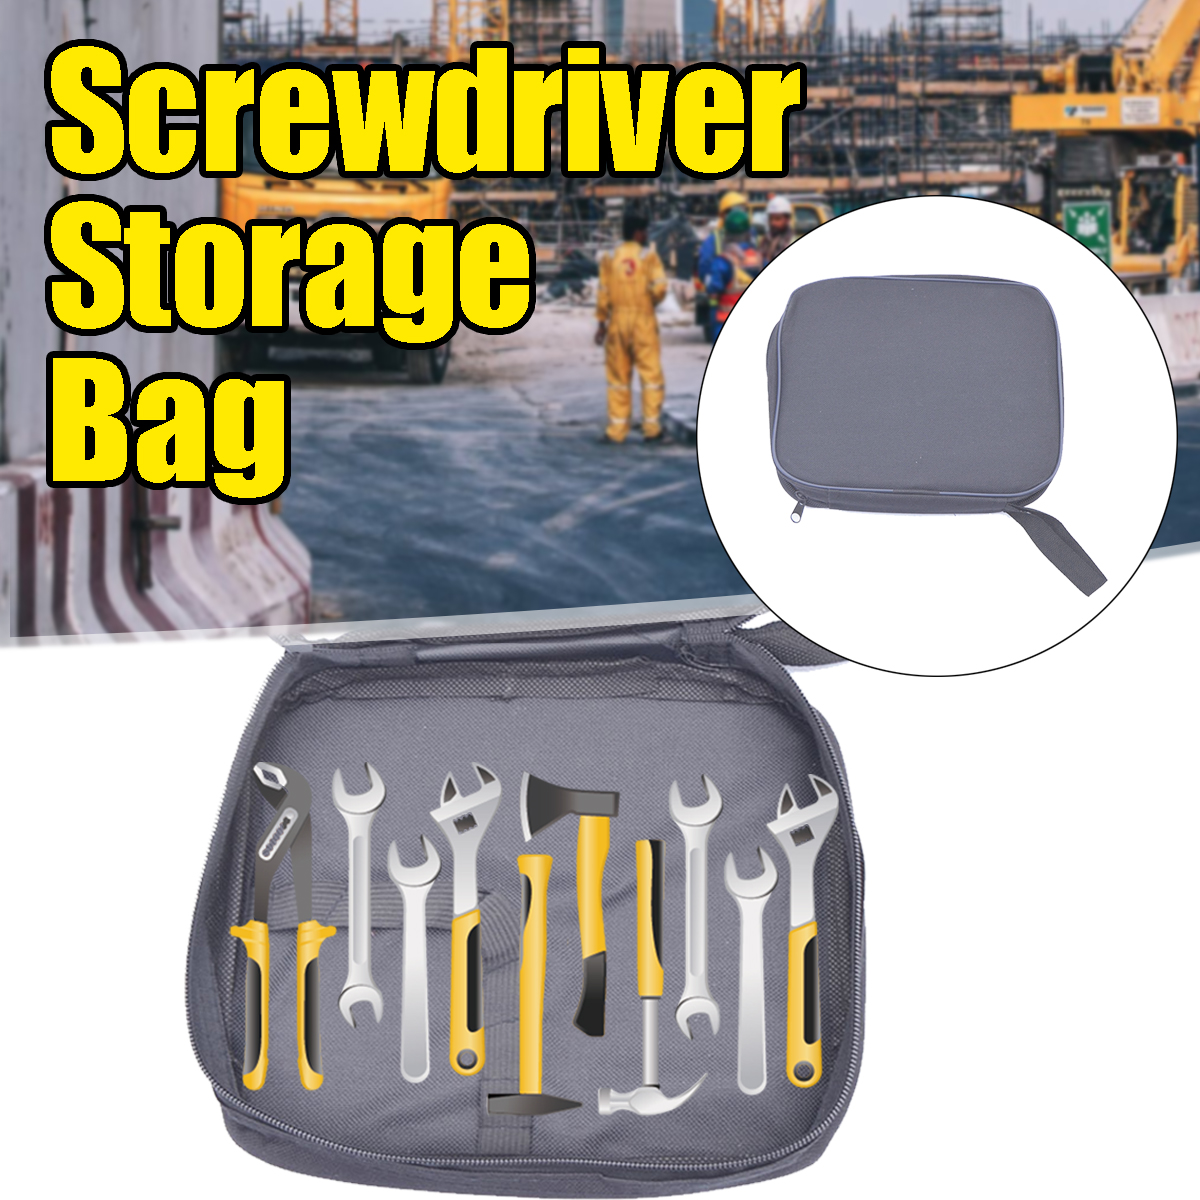 Portable-Tool-Bag-Pouch-Organize-Canvas-Storage-Bag-Small-Parts-Hand-Tool-Plumber-1557725-2